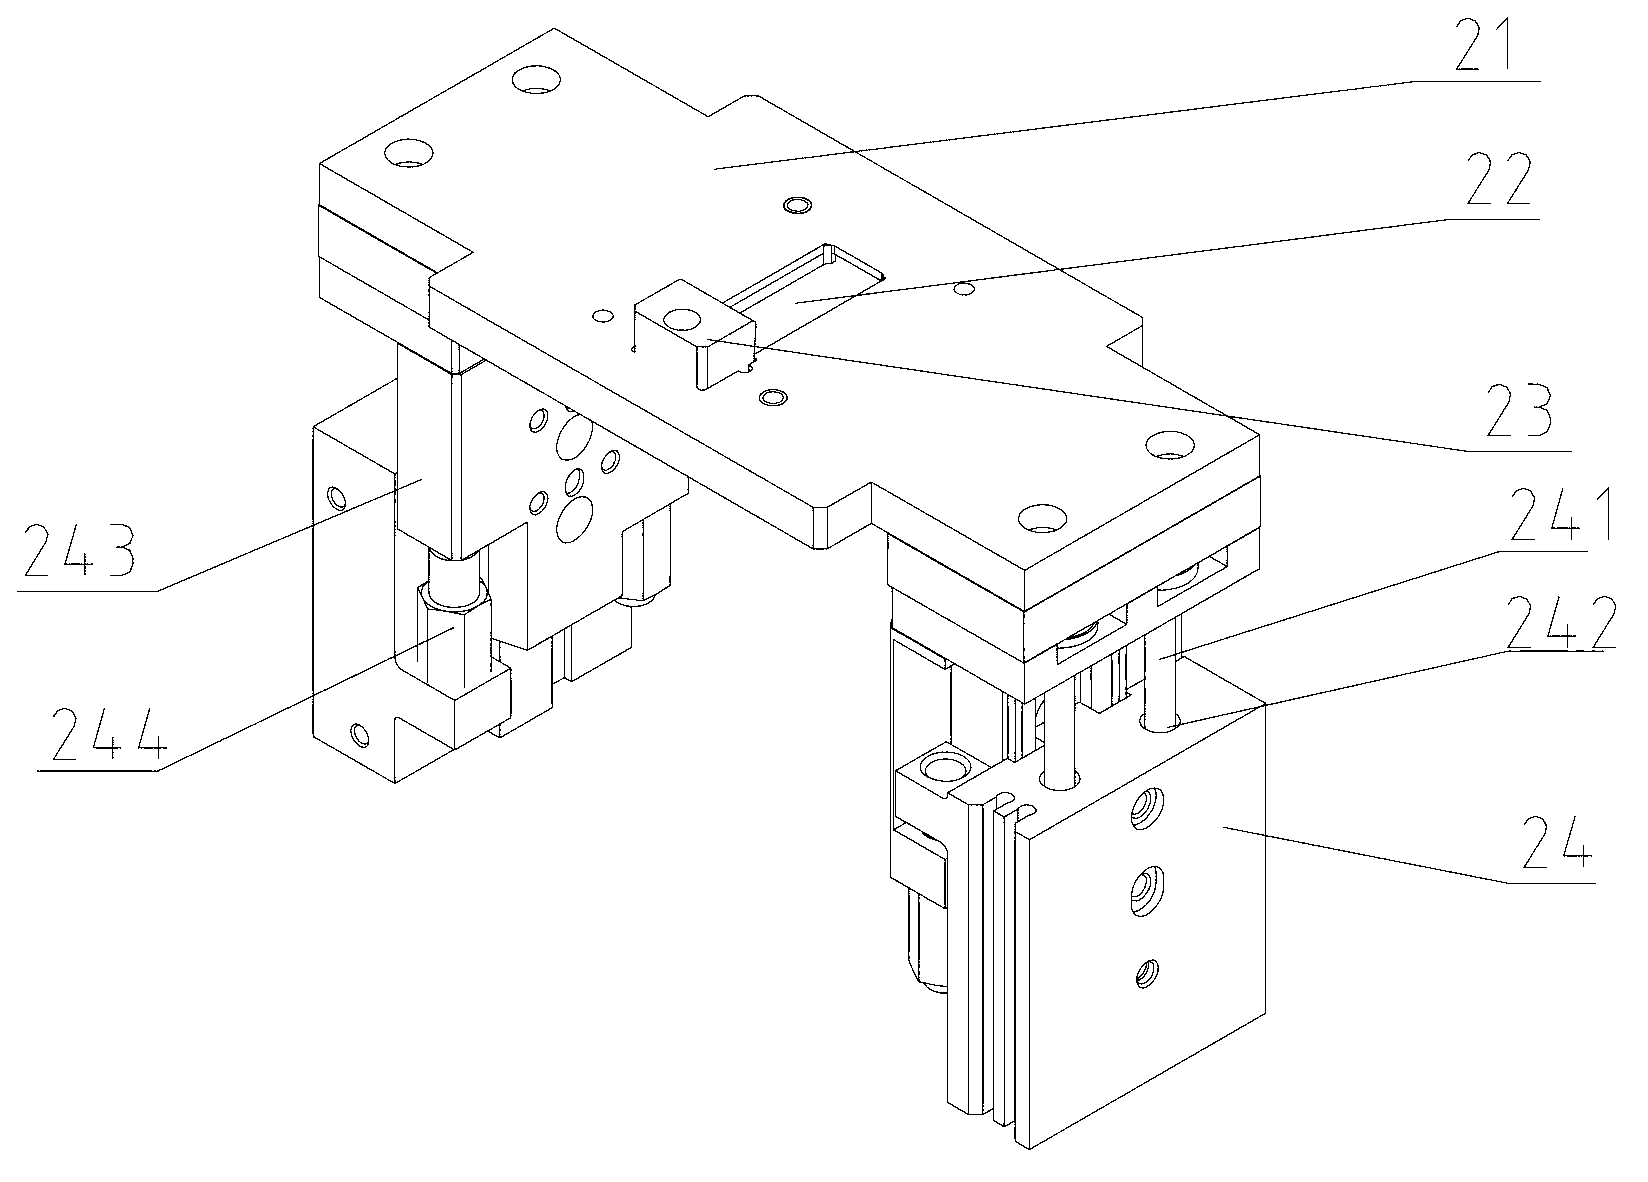 MP3 product shell pressing and assembling device